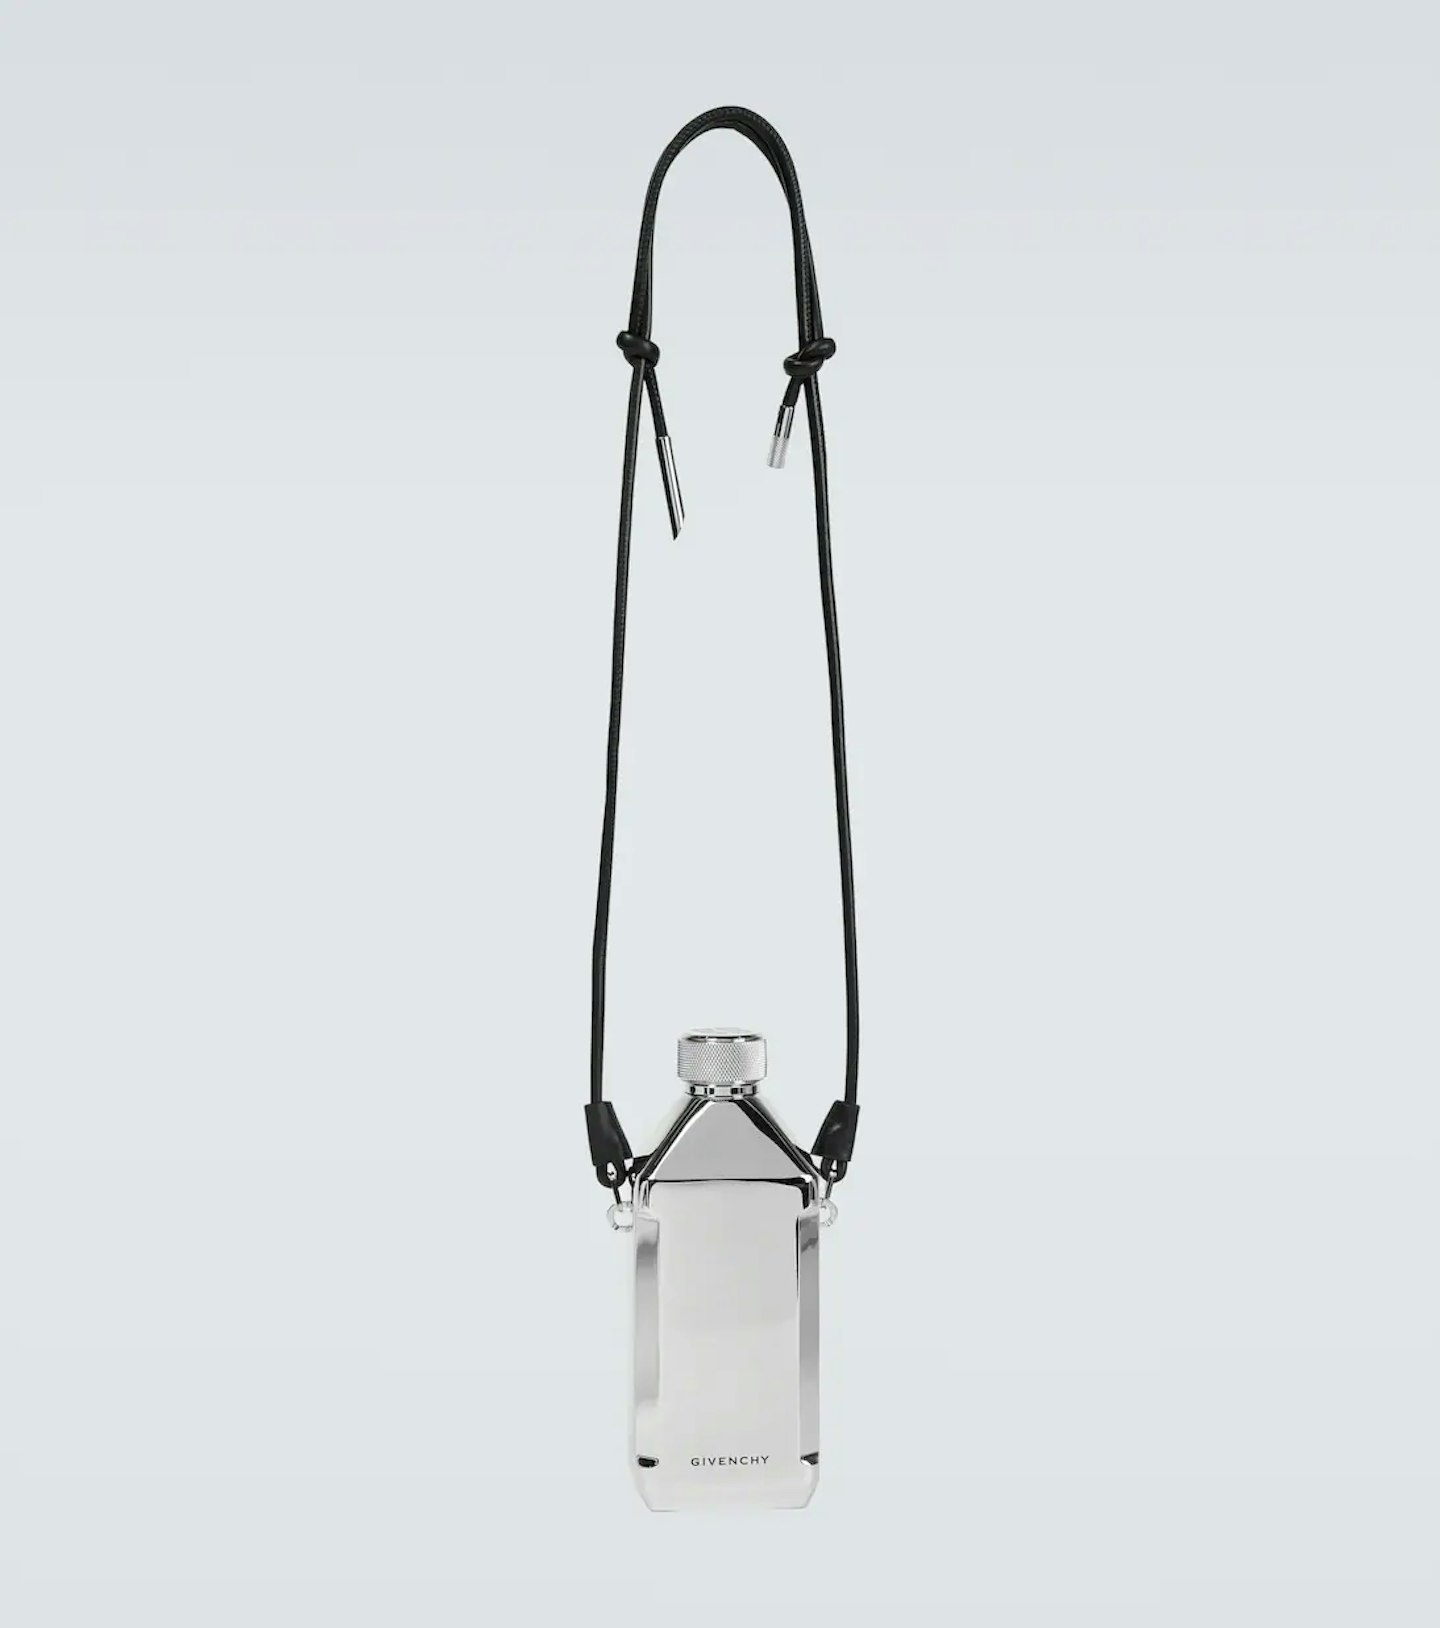 givenchy water bottle 